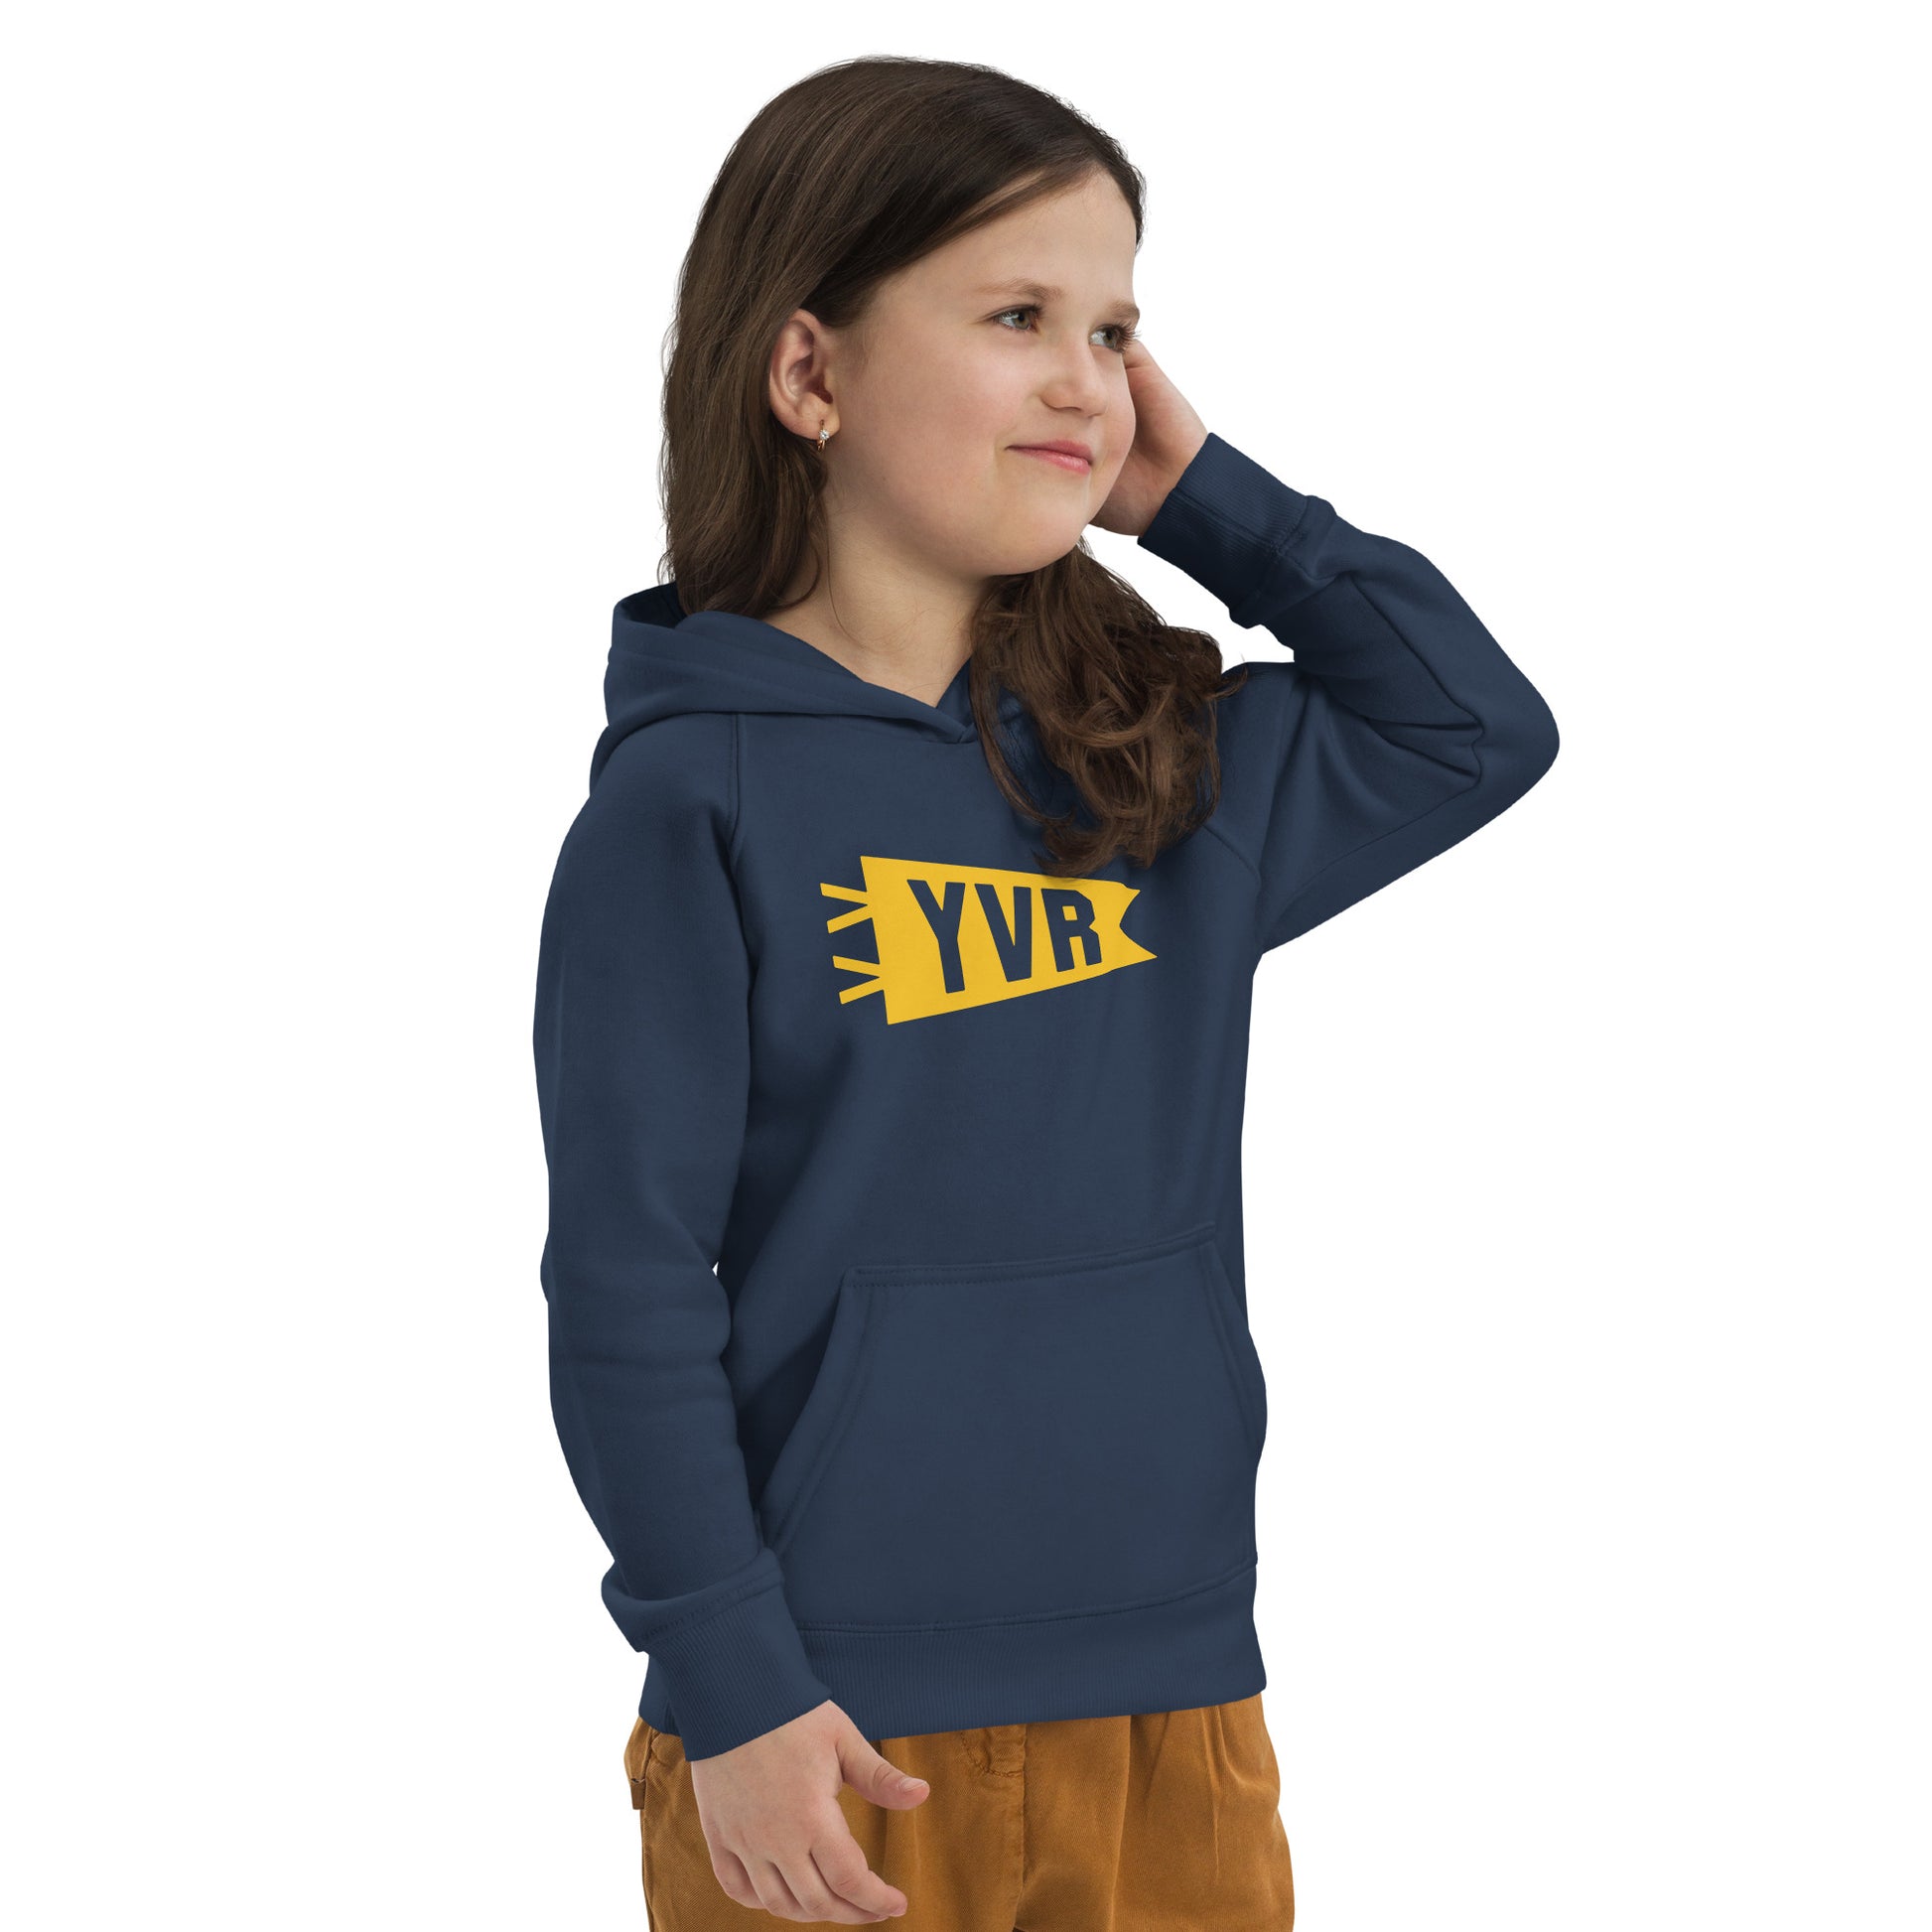 Kid's Sustainable Hoodie - Yellow Graphic • YVR Vancouver • YHM Designs - Image 06